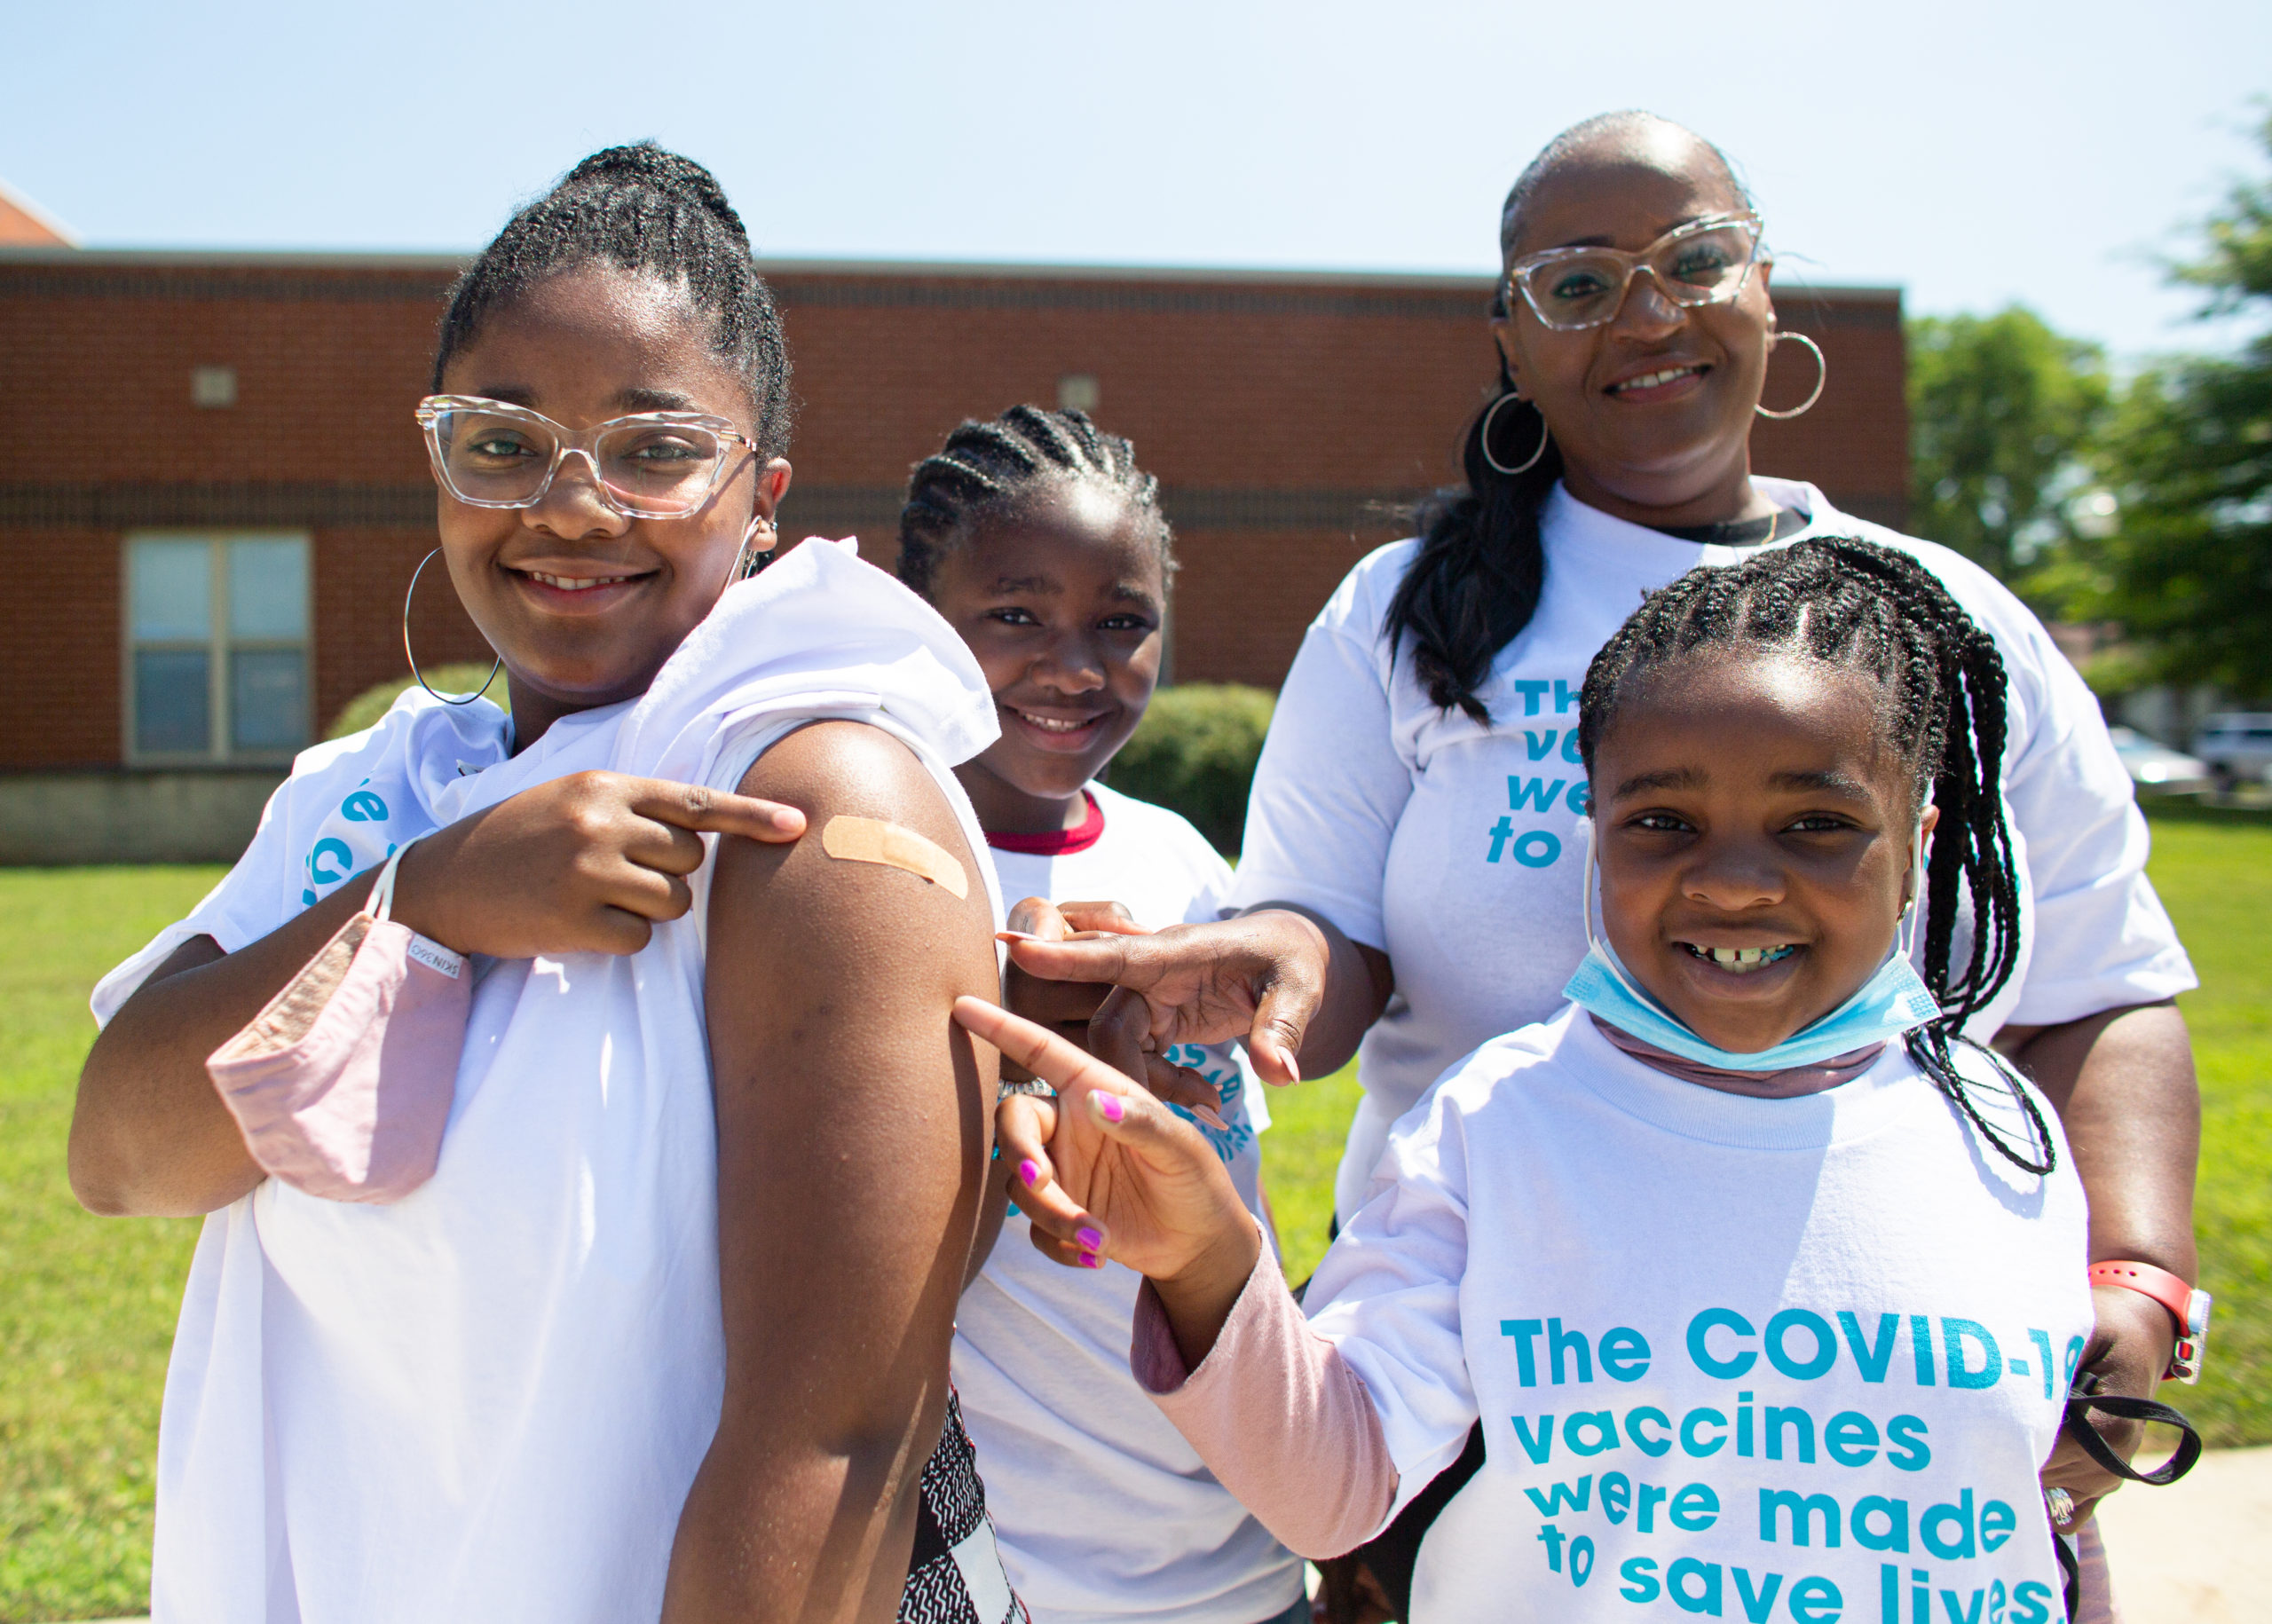 Young girl posing with her family after receiving a COVID-19 vaccine.